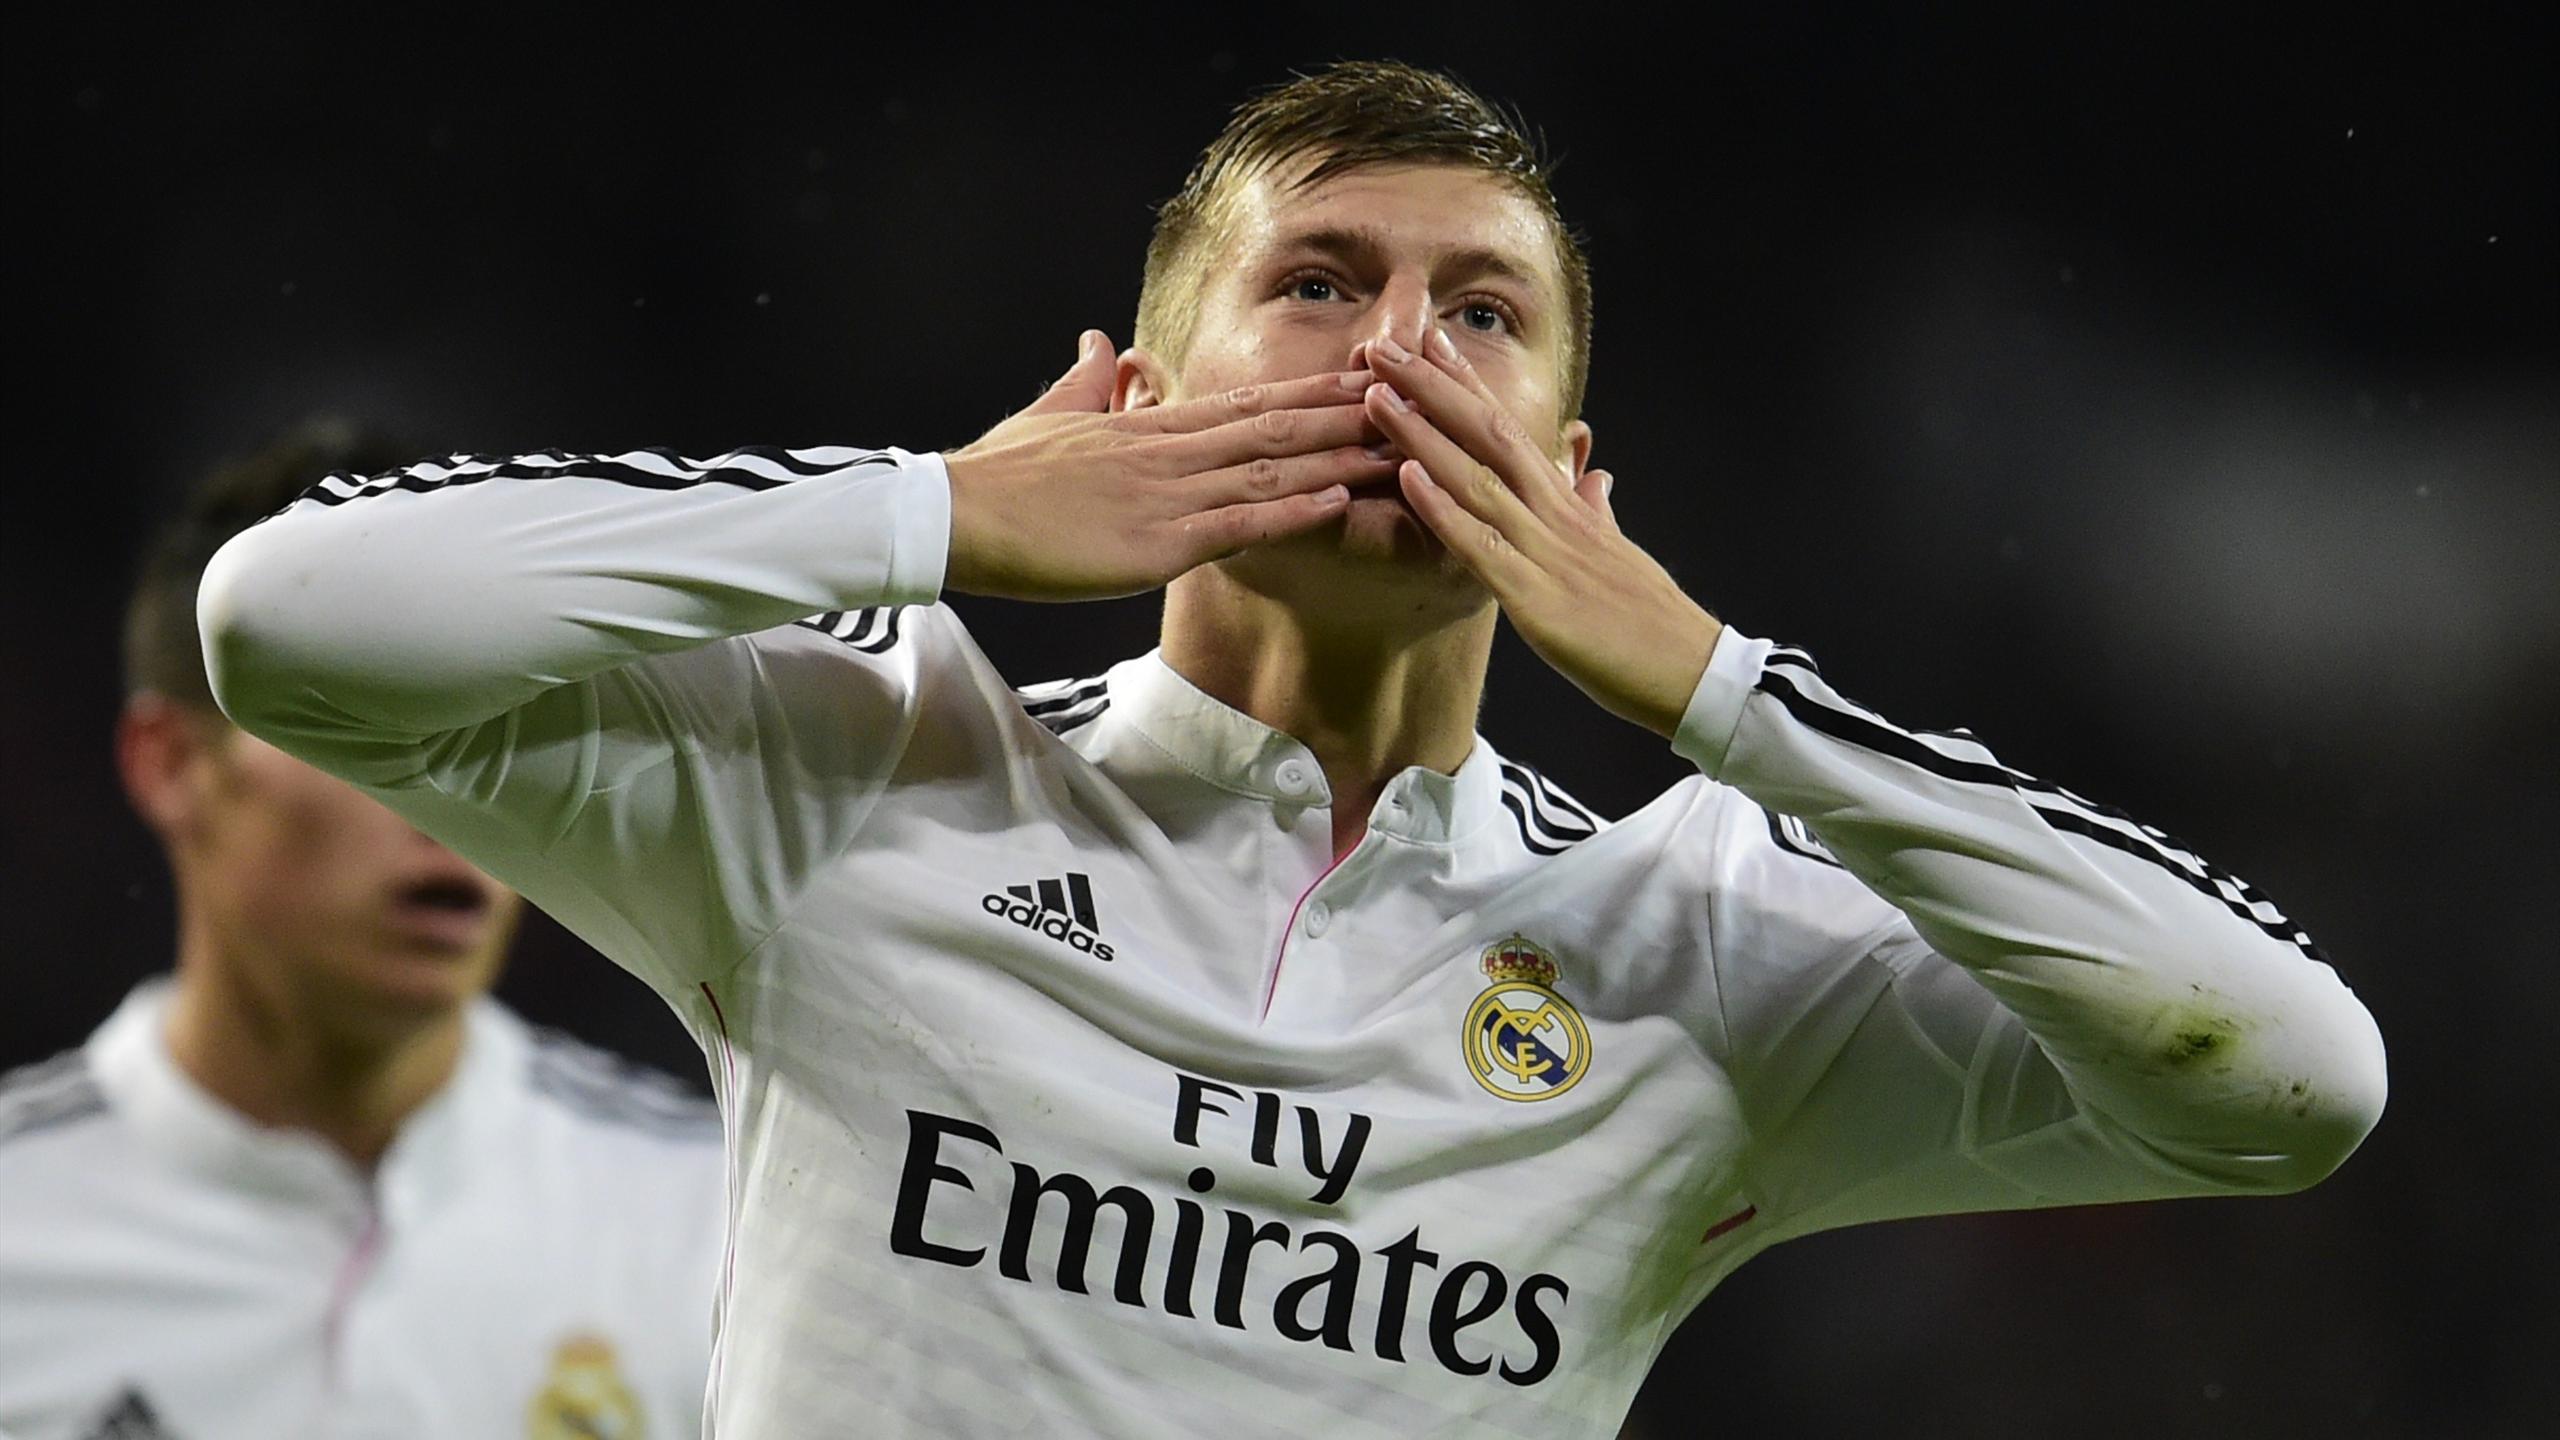 Toni Kroos: Being at Real Madrid is special